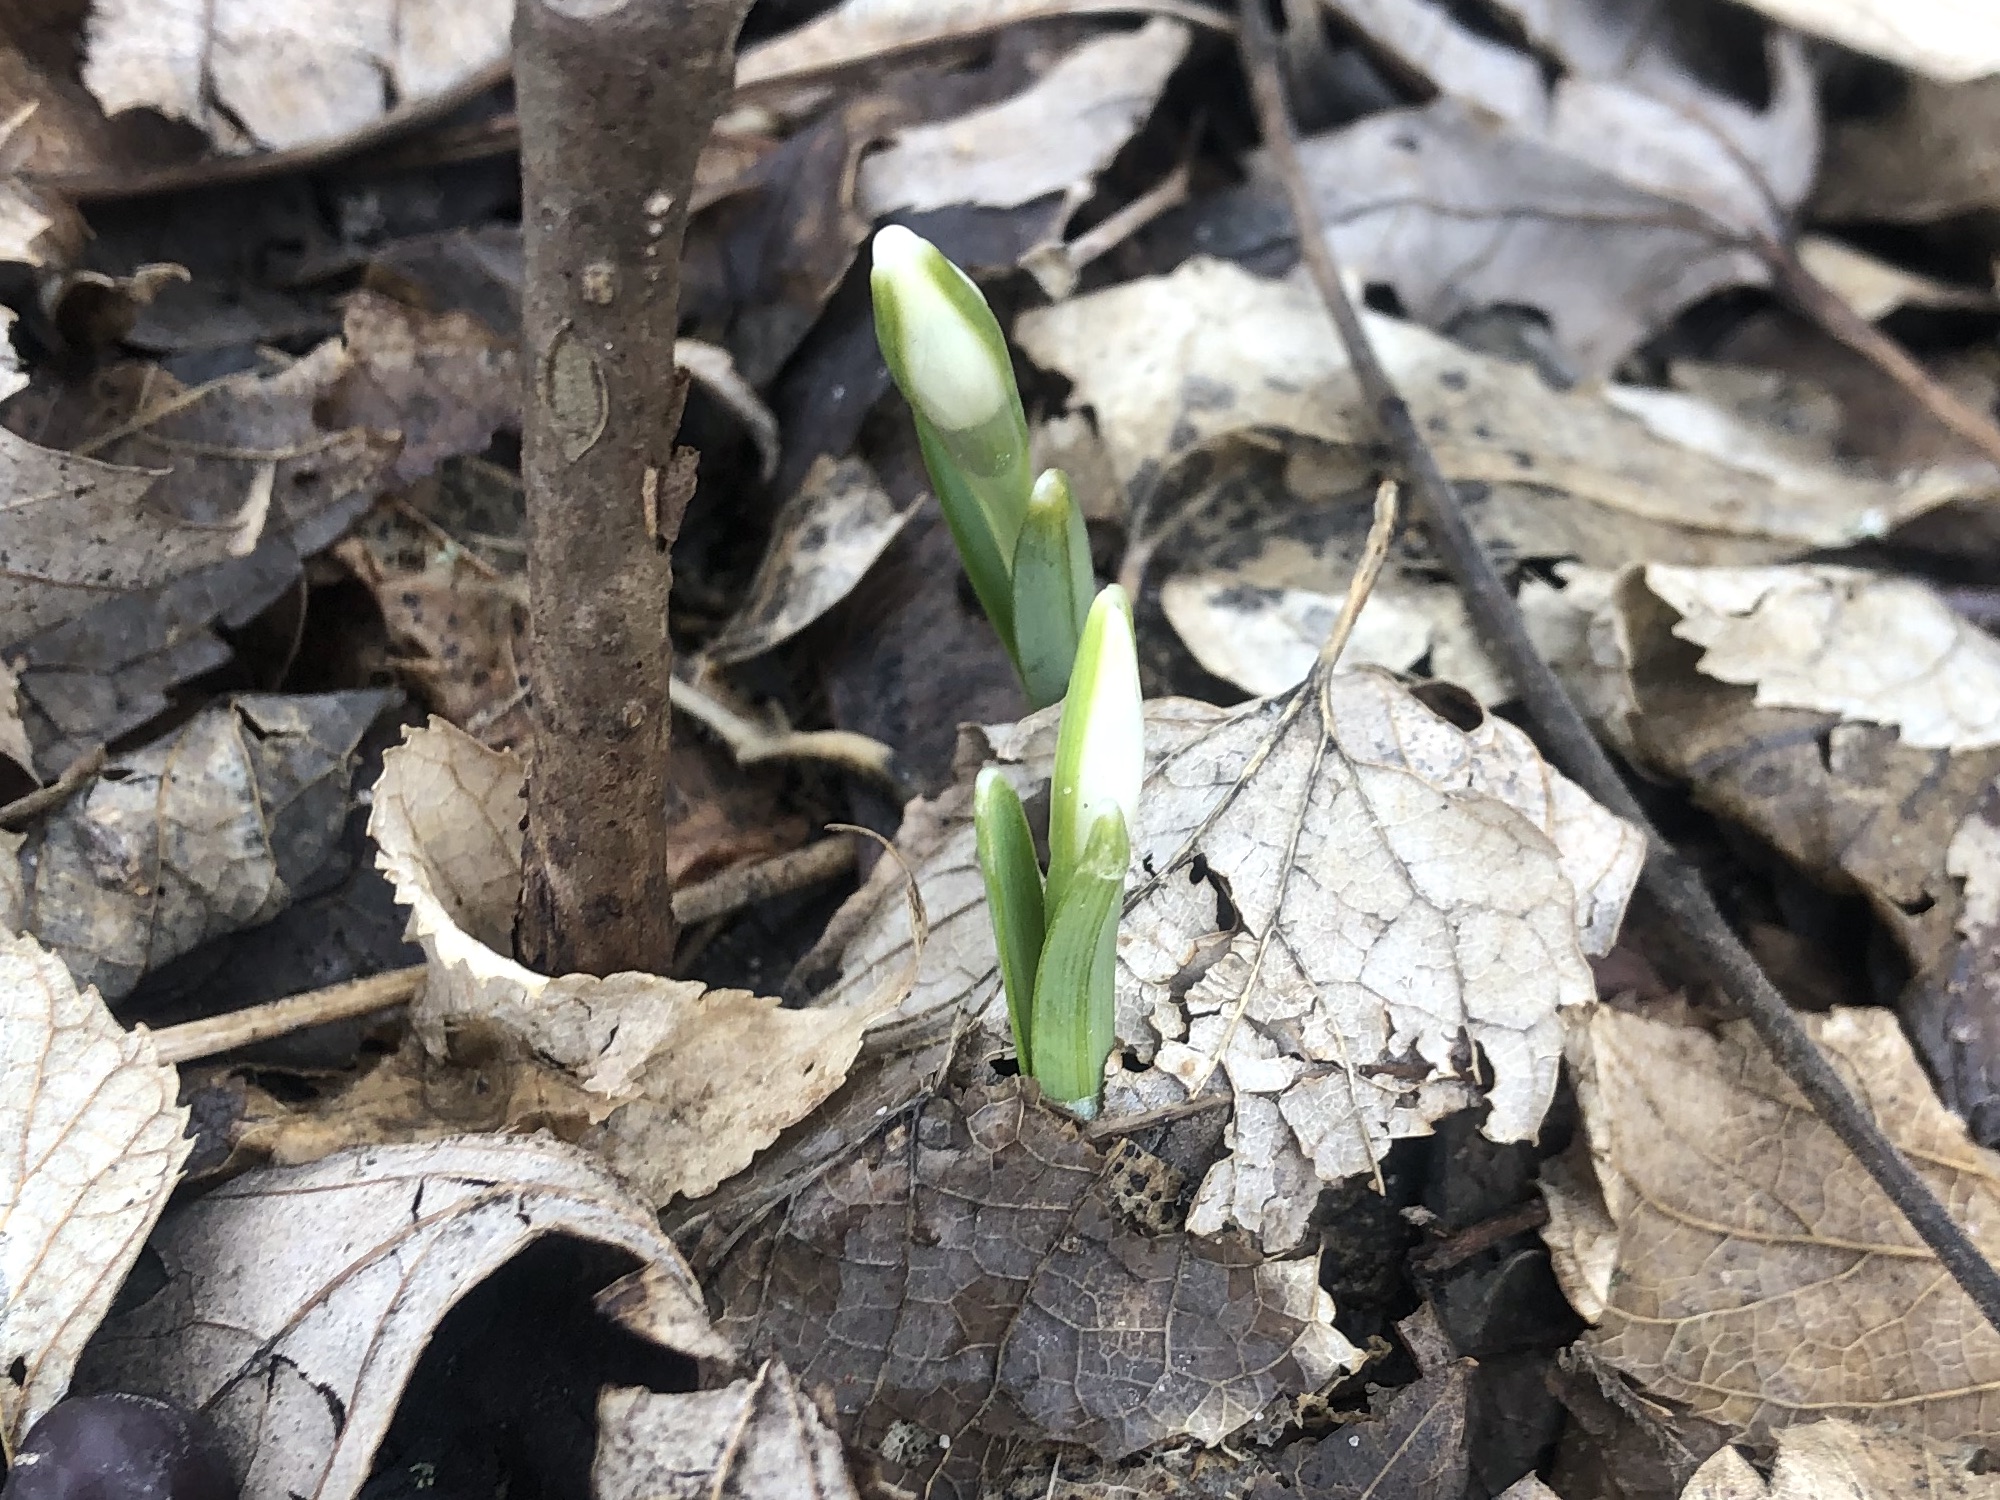 Snowdrops emerging in Madison Wisconsin along Arbor Drive on February 15, 2023.